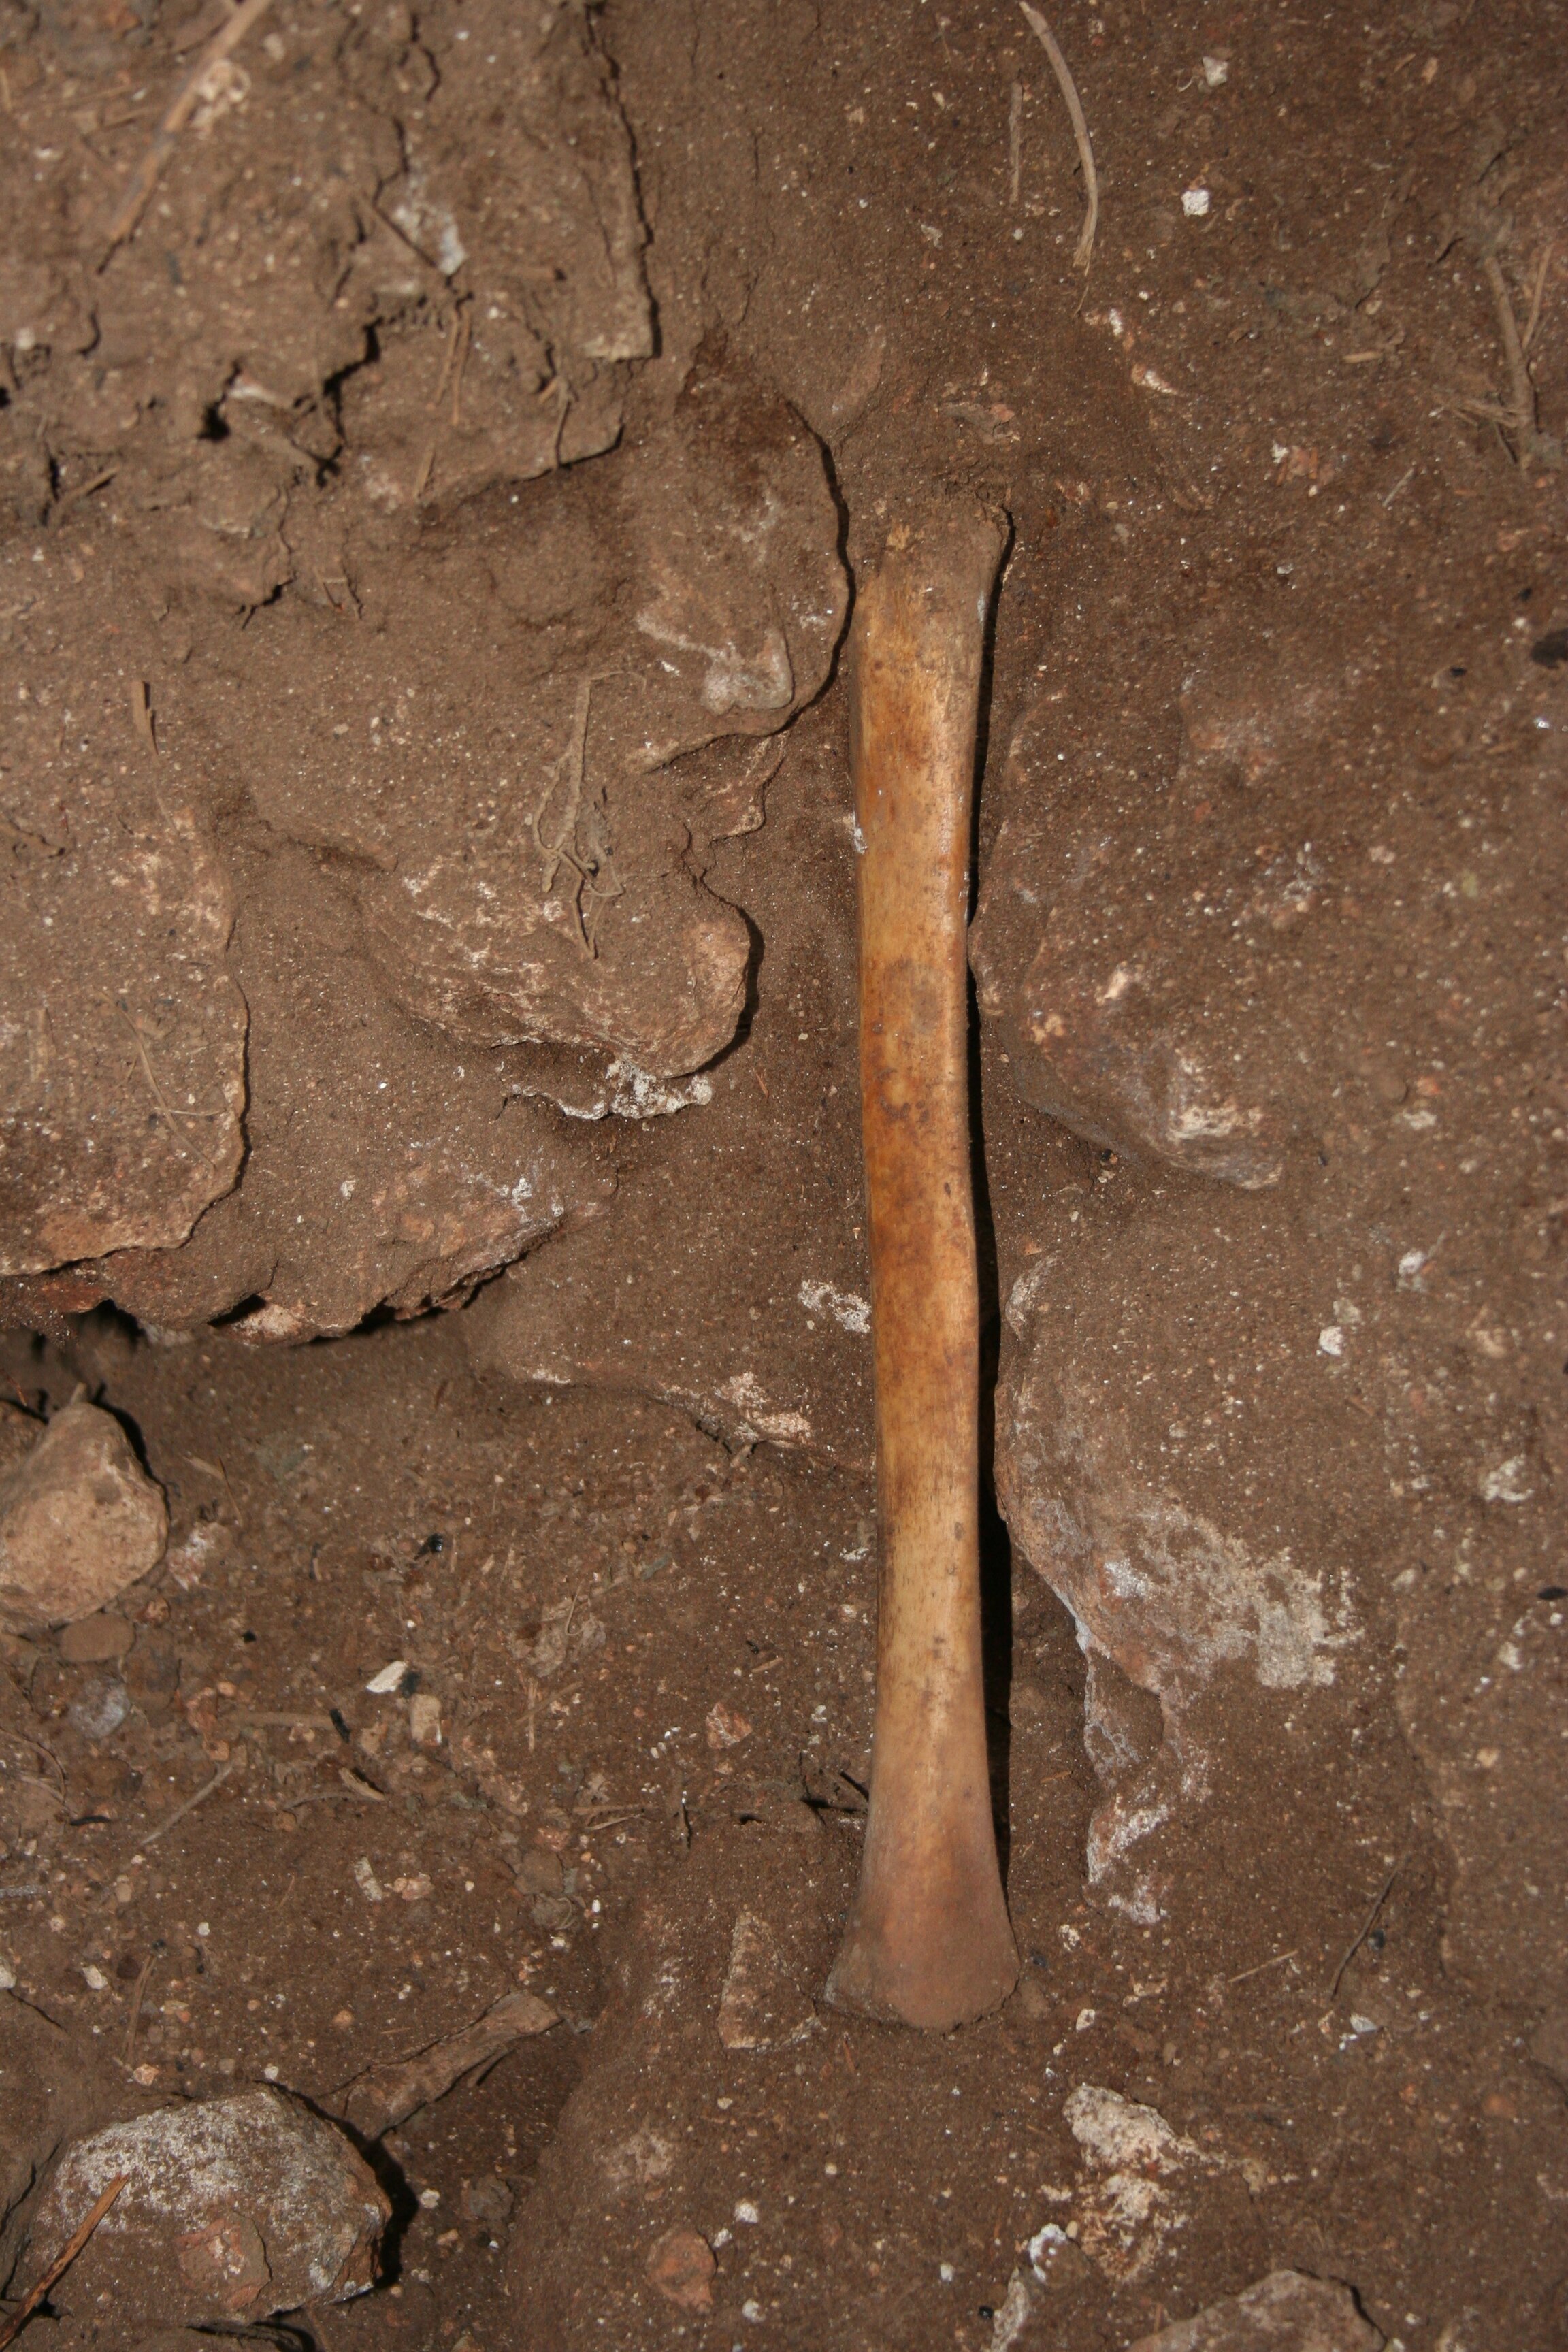 Ancient human remains buried in Spanish caves were subsequently manipulated and utilized